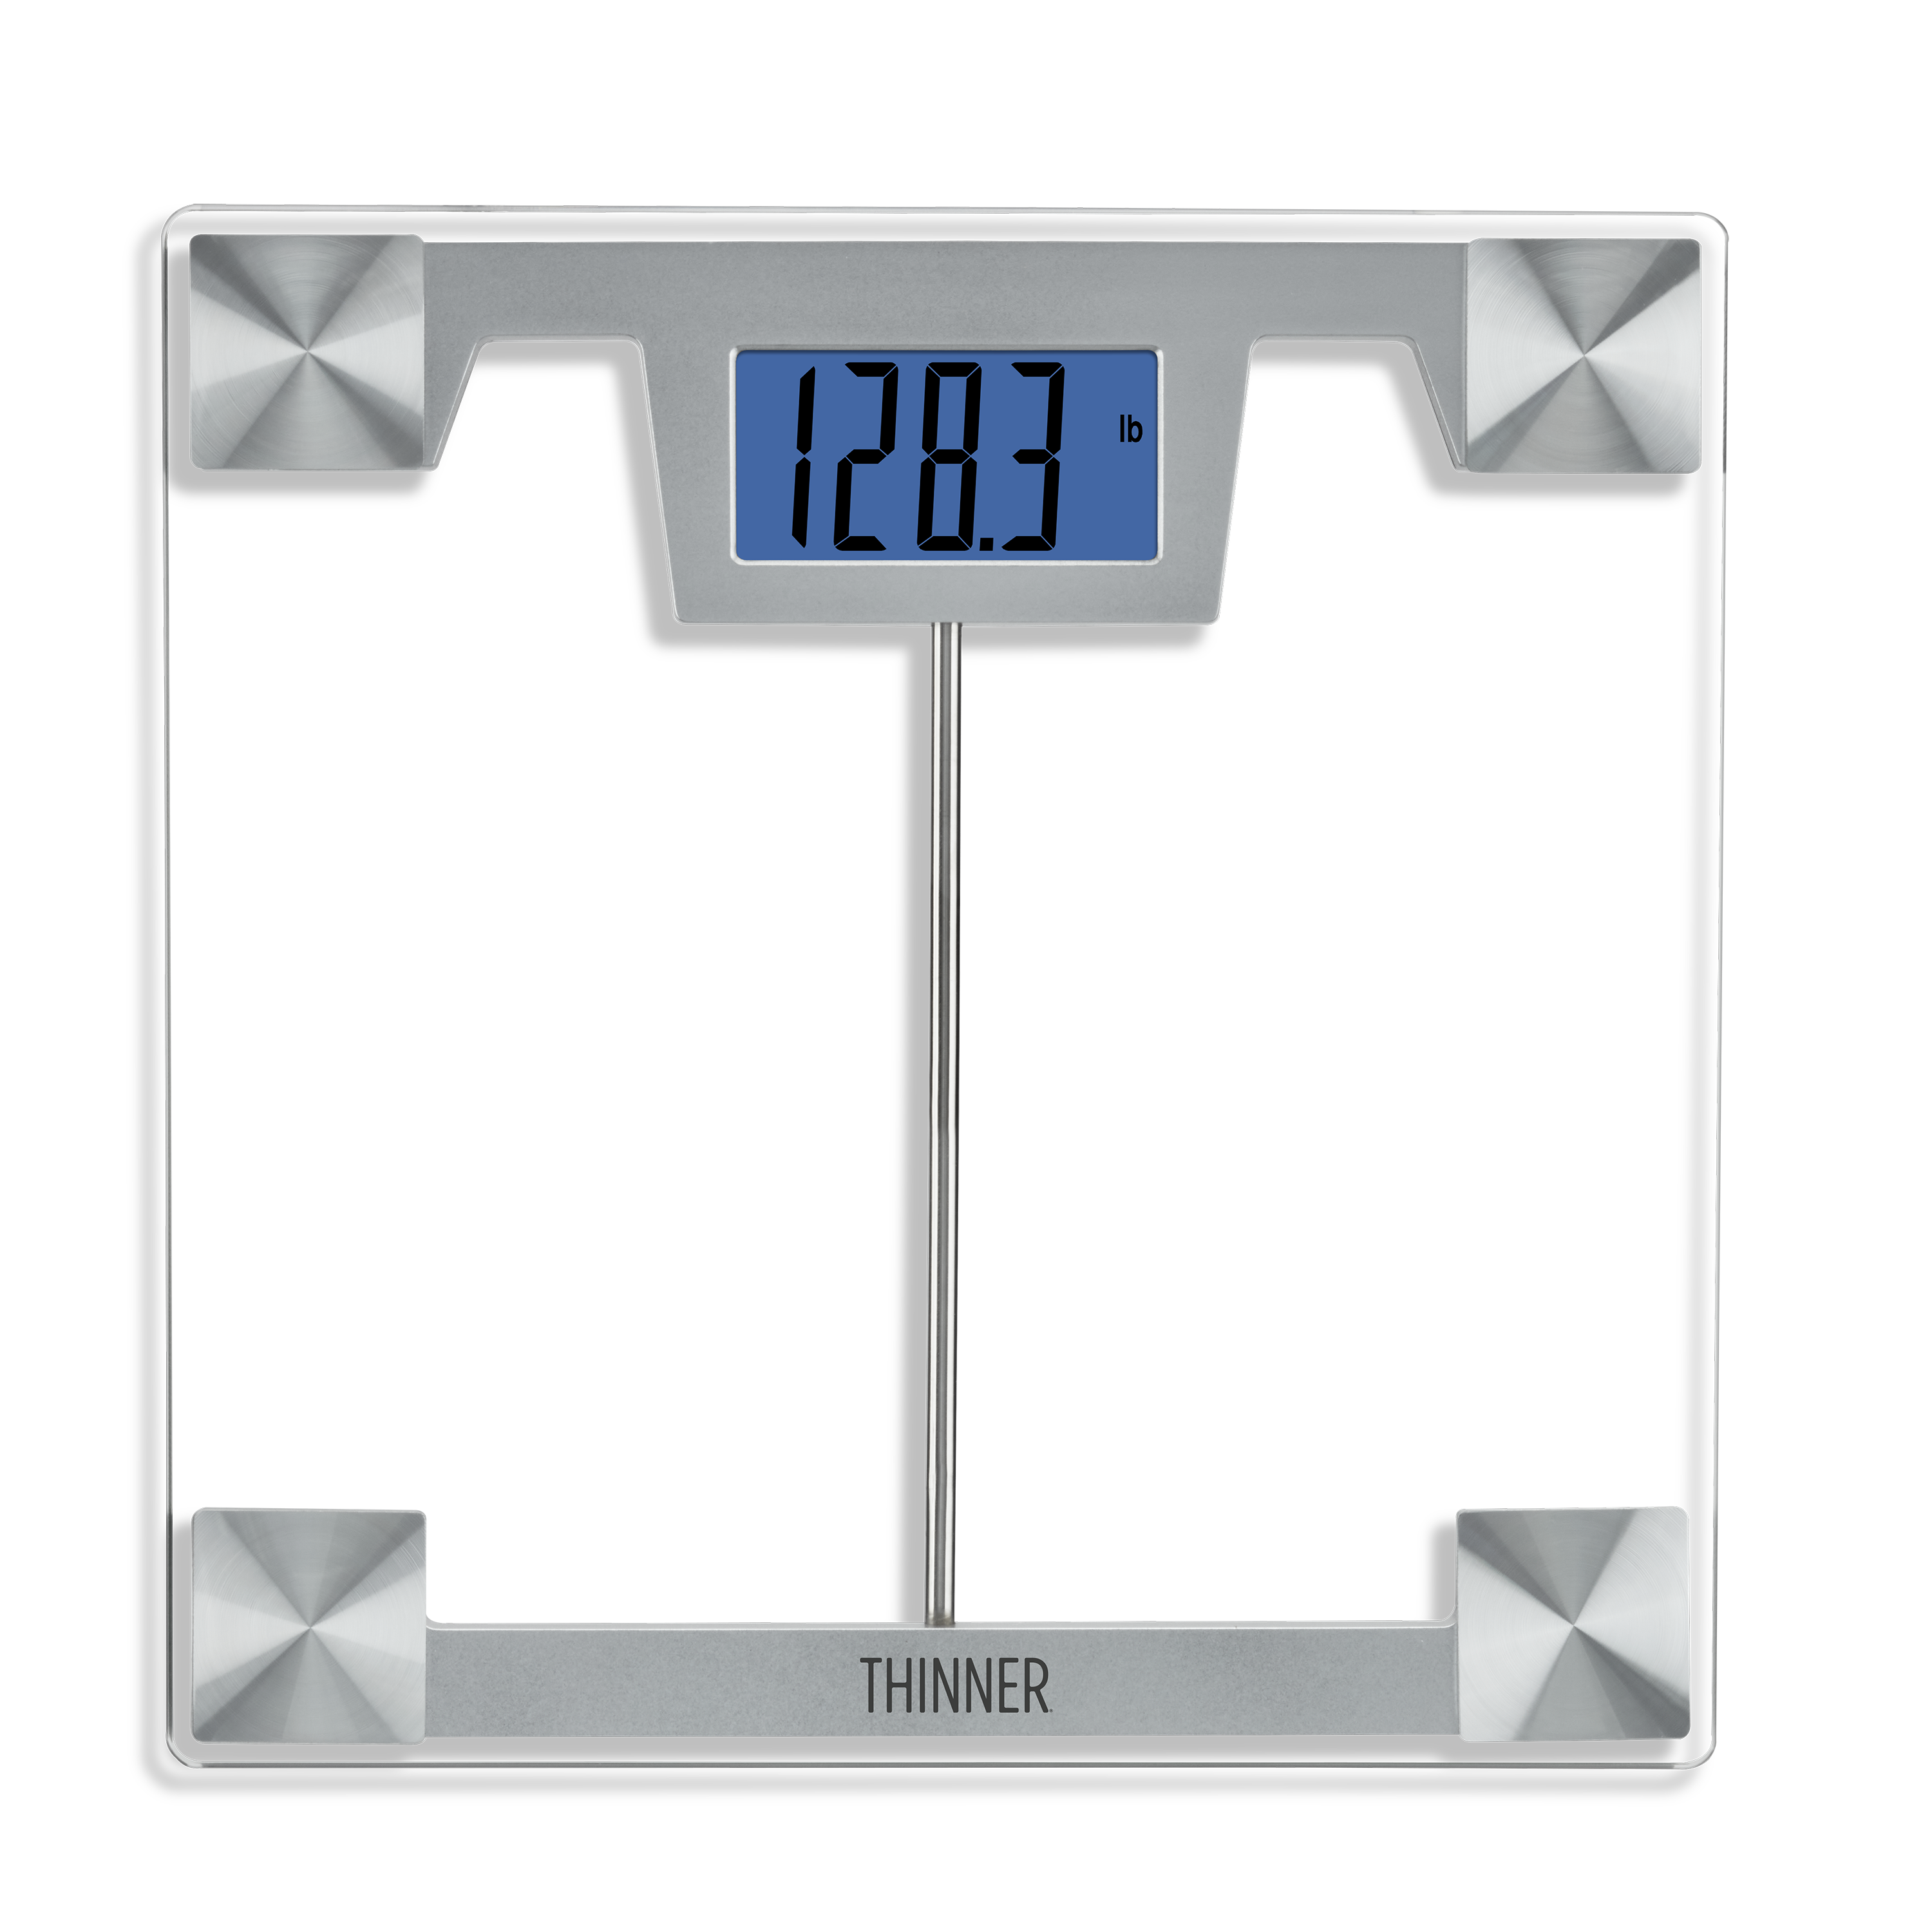 Thinner by Conair Extra-Large Easy-to-Read Digital Bathroom Scale